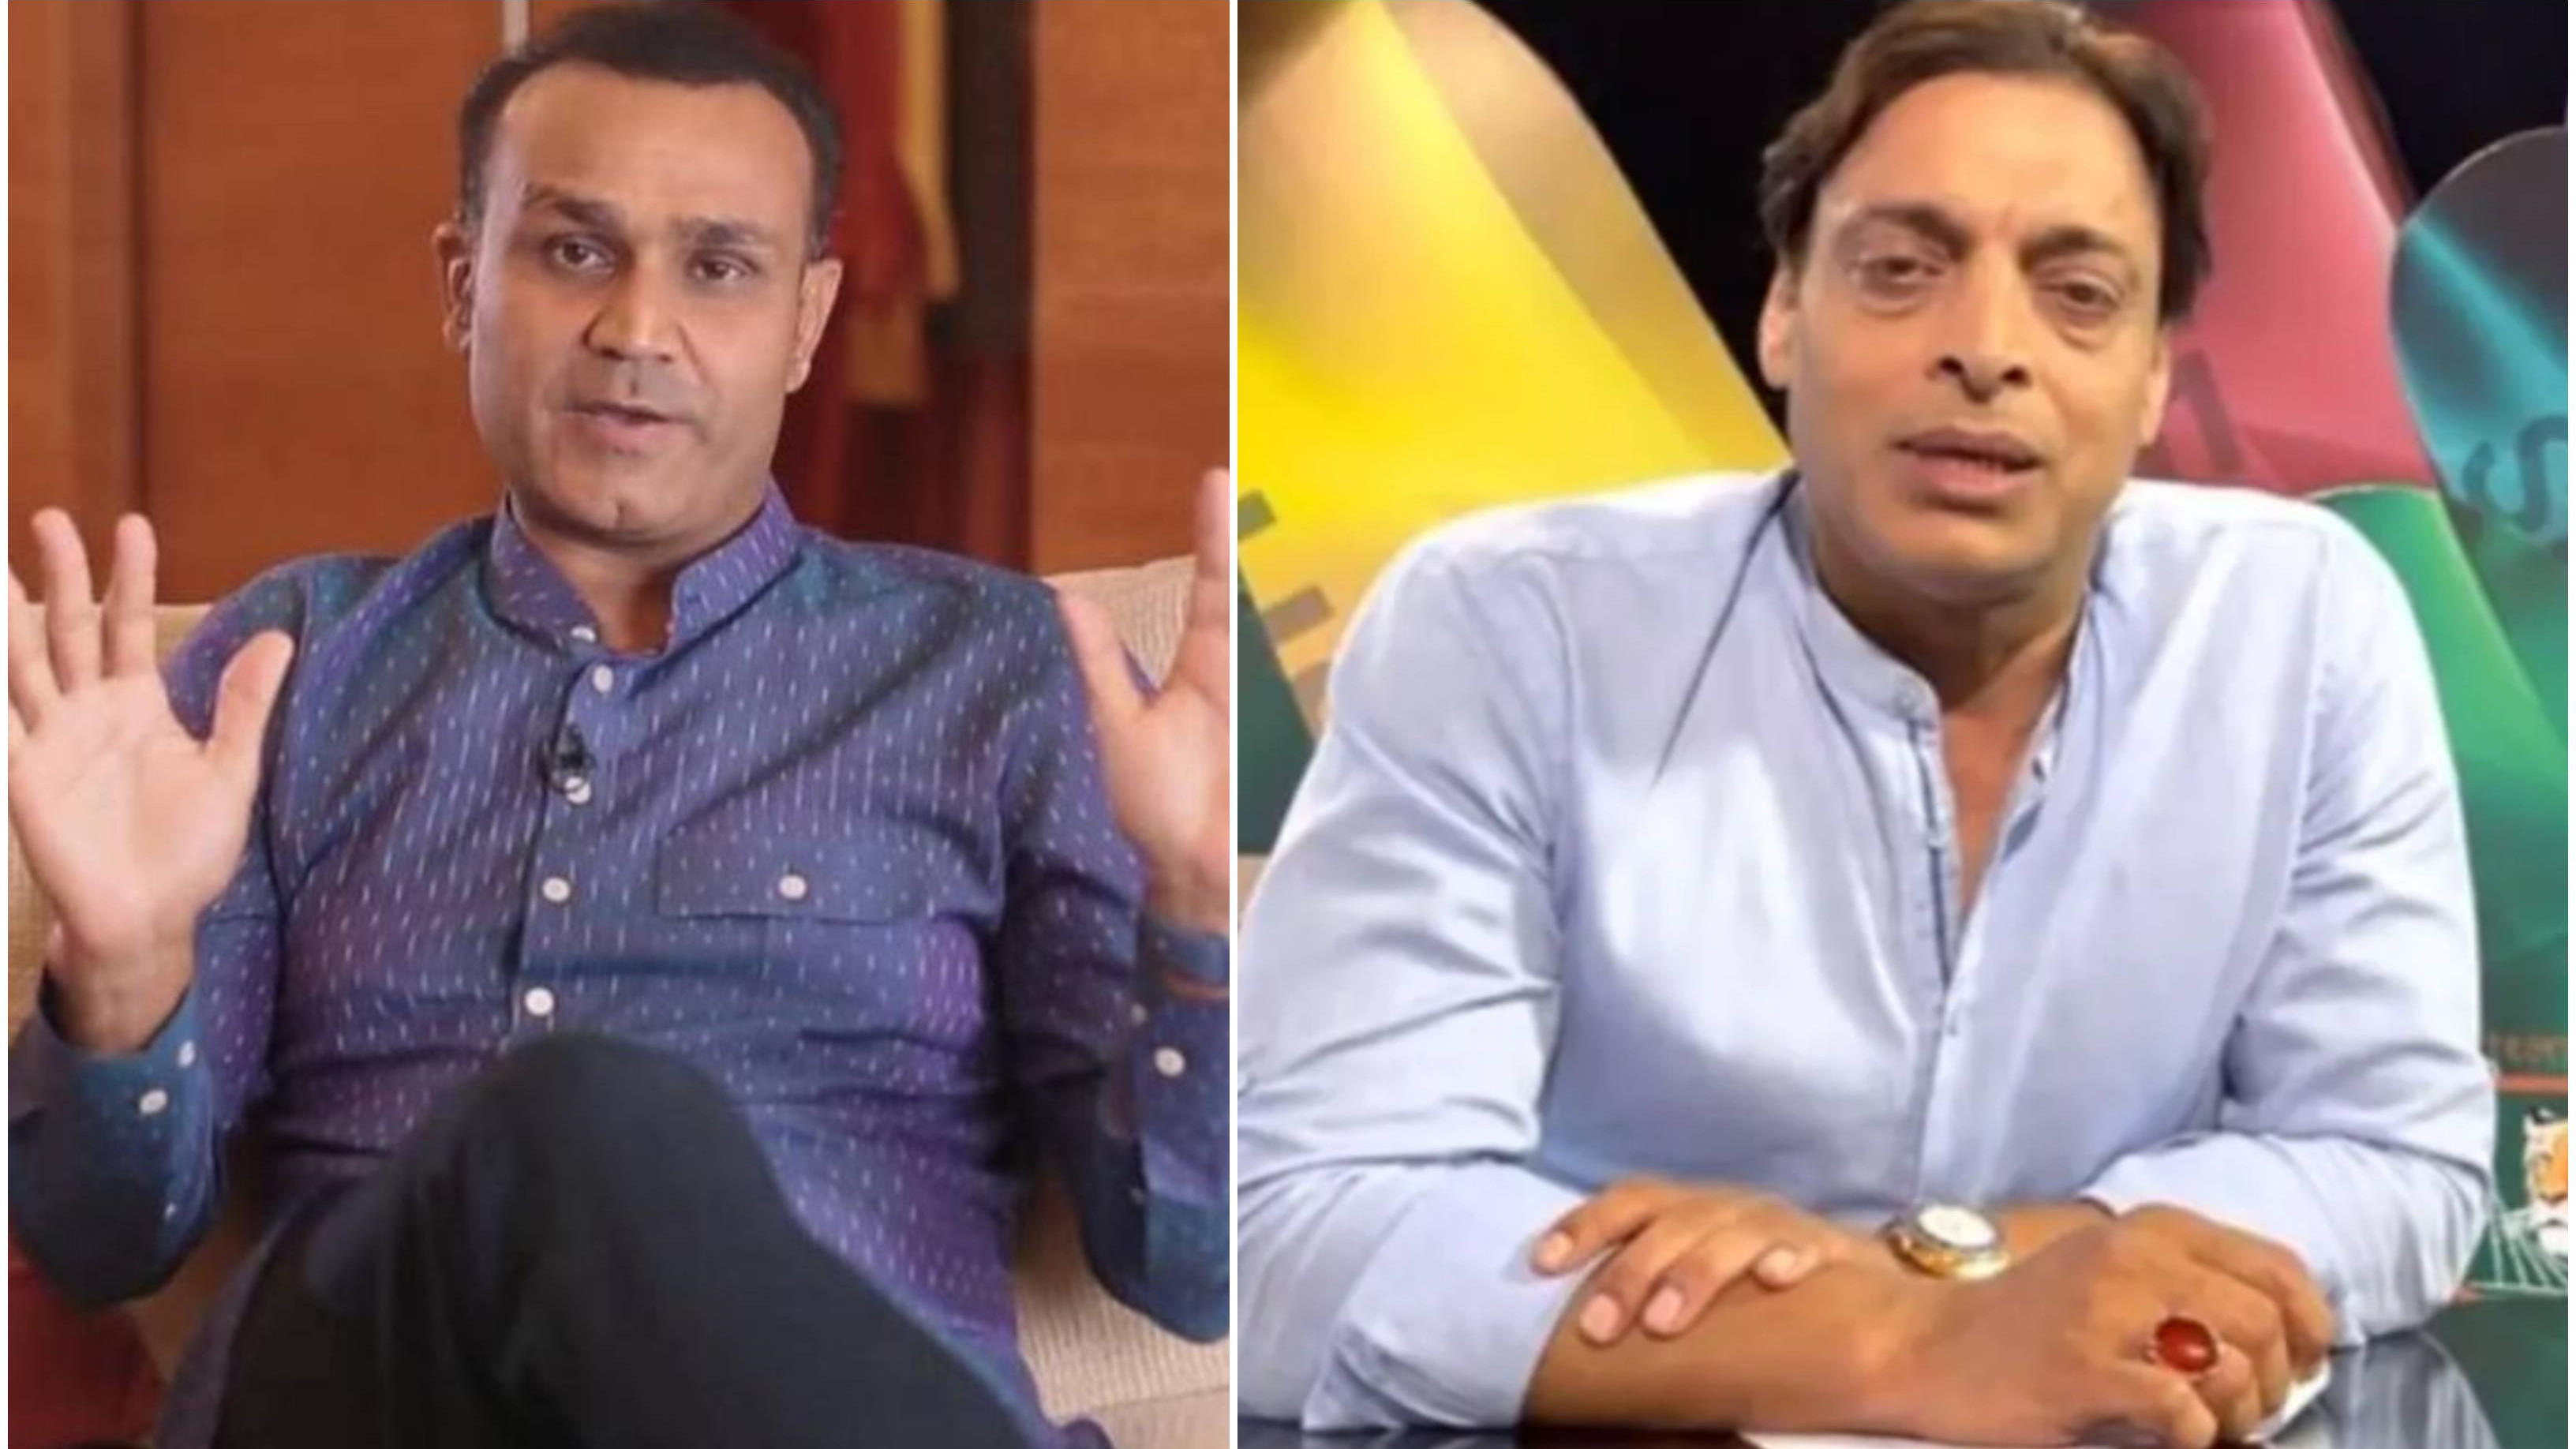 “My hair strands are more than your notes”: Virender Sehwag's savage reply to Shoaib Akhtar